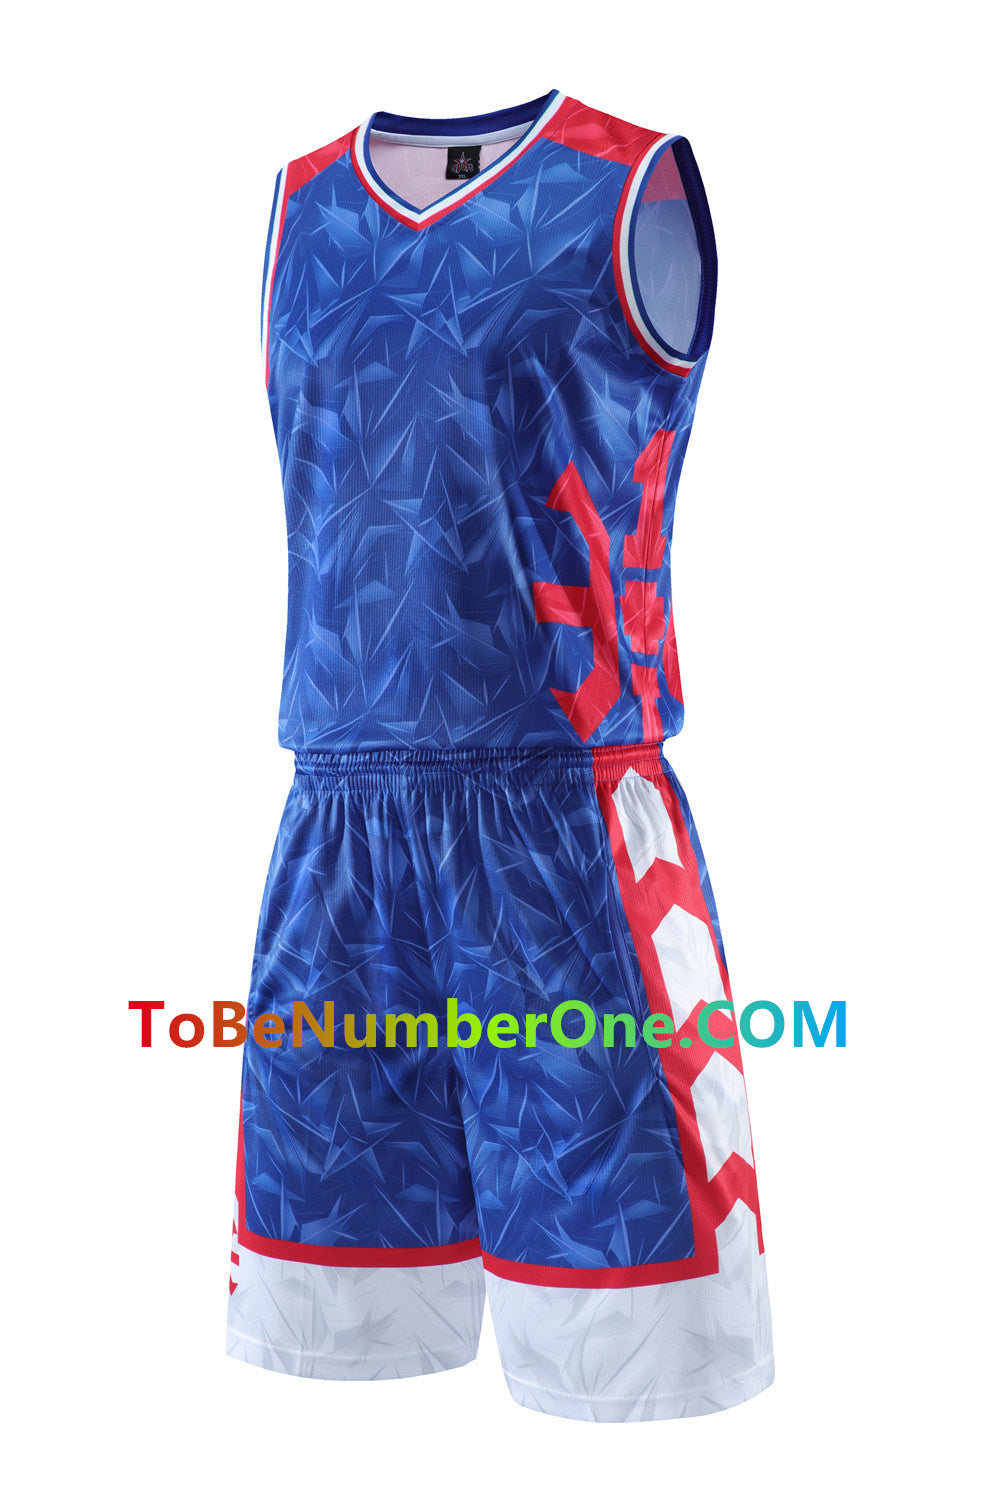 Customize instock High Quality Quick-drying basketball jerseys&shorts with pocket 218# print with team name , player and number.